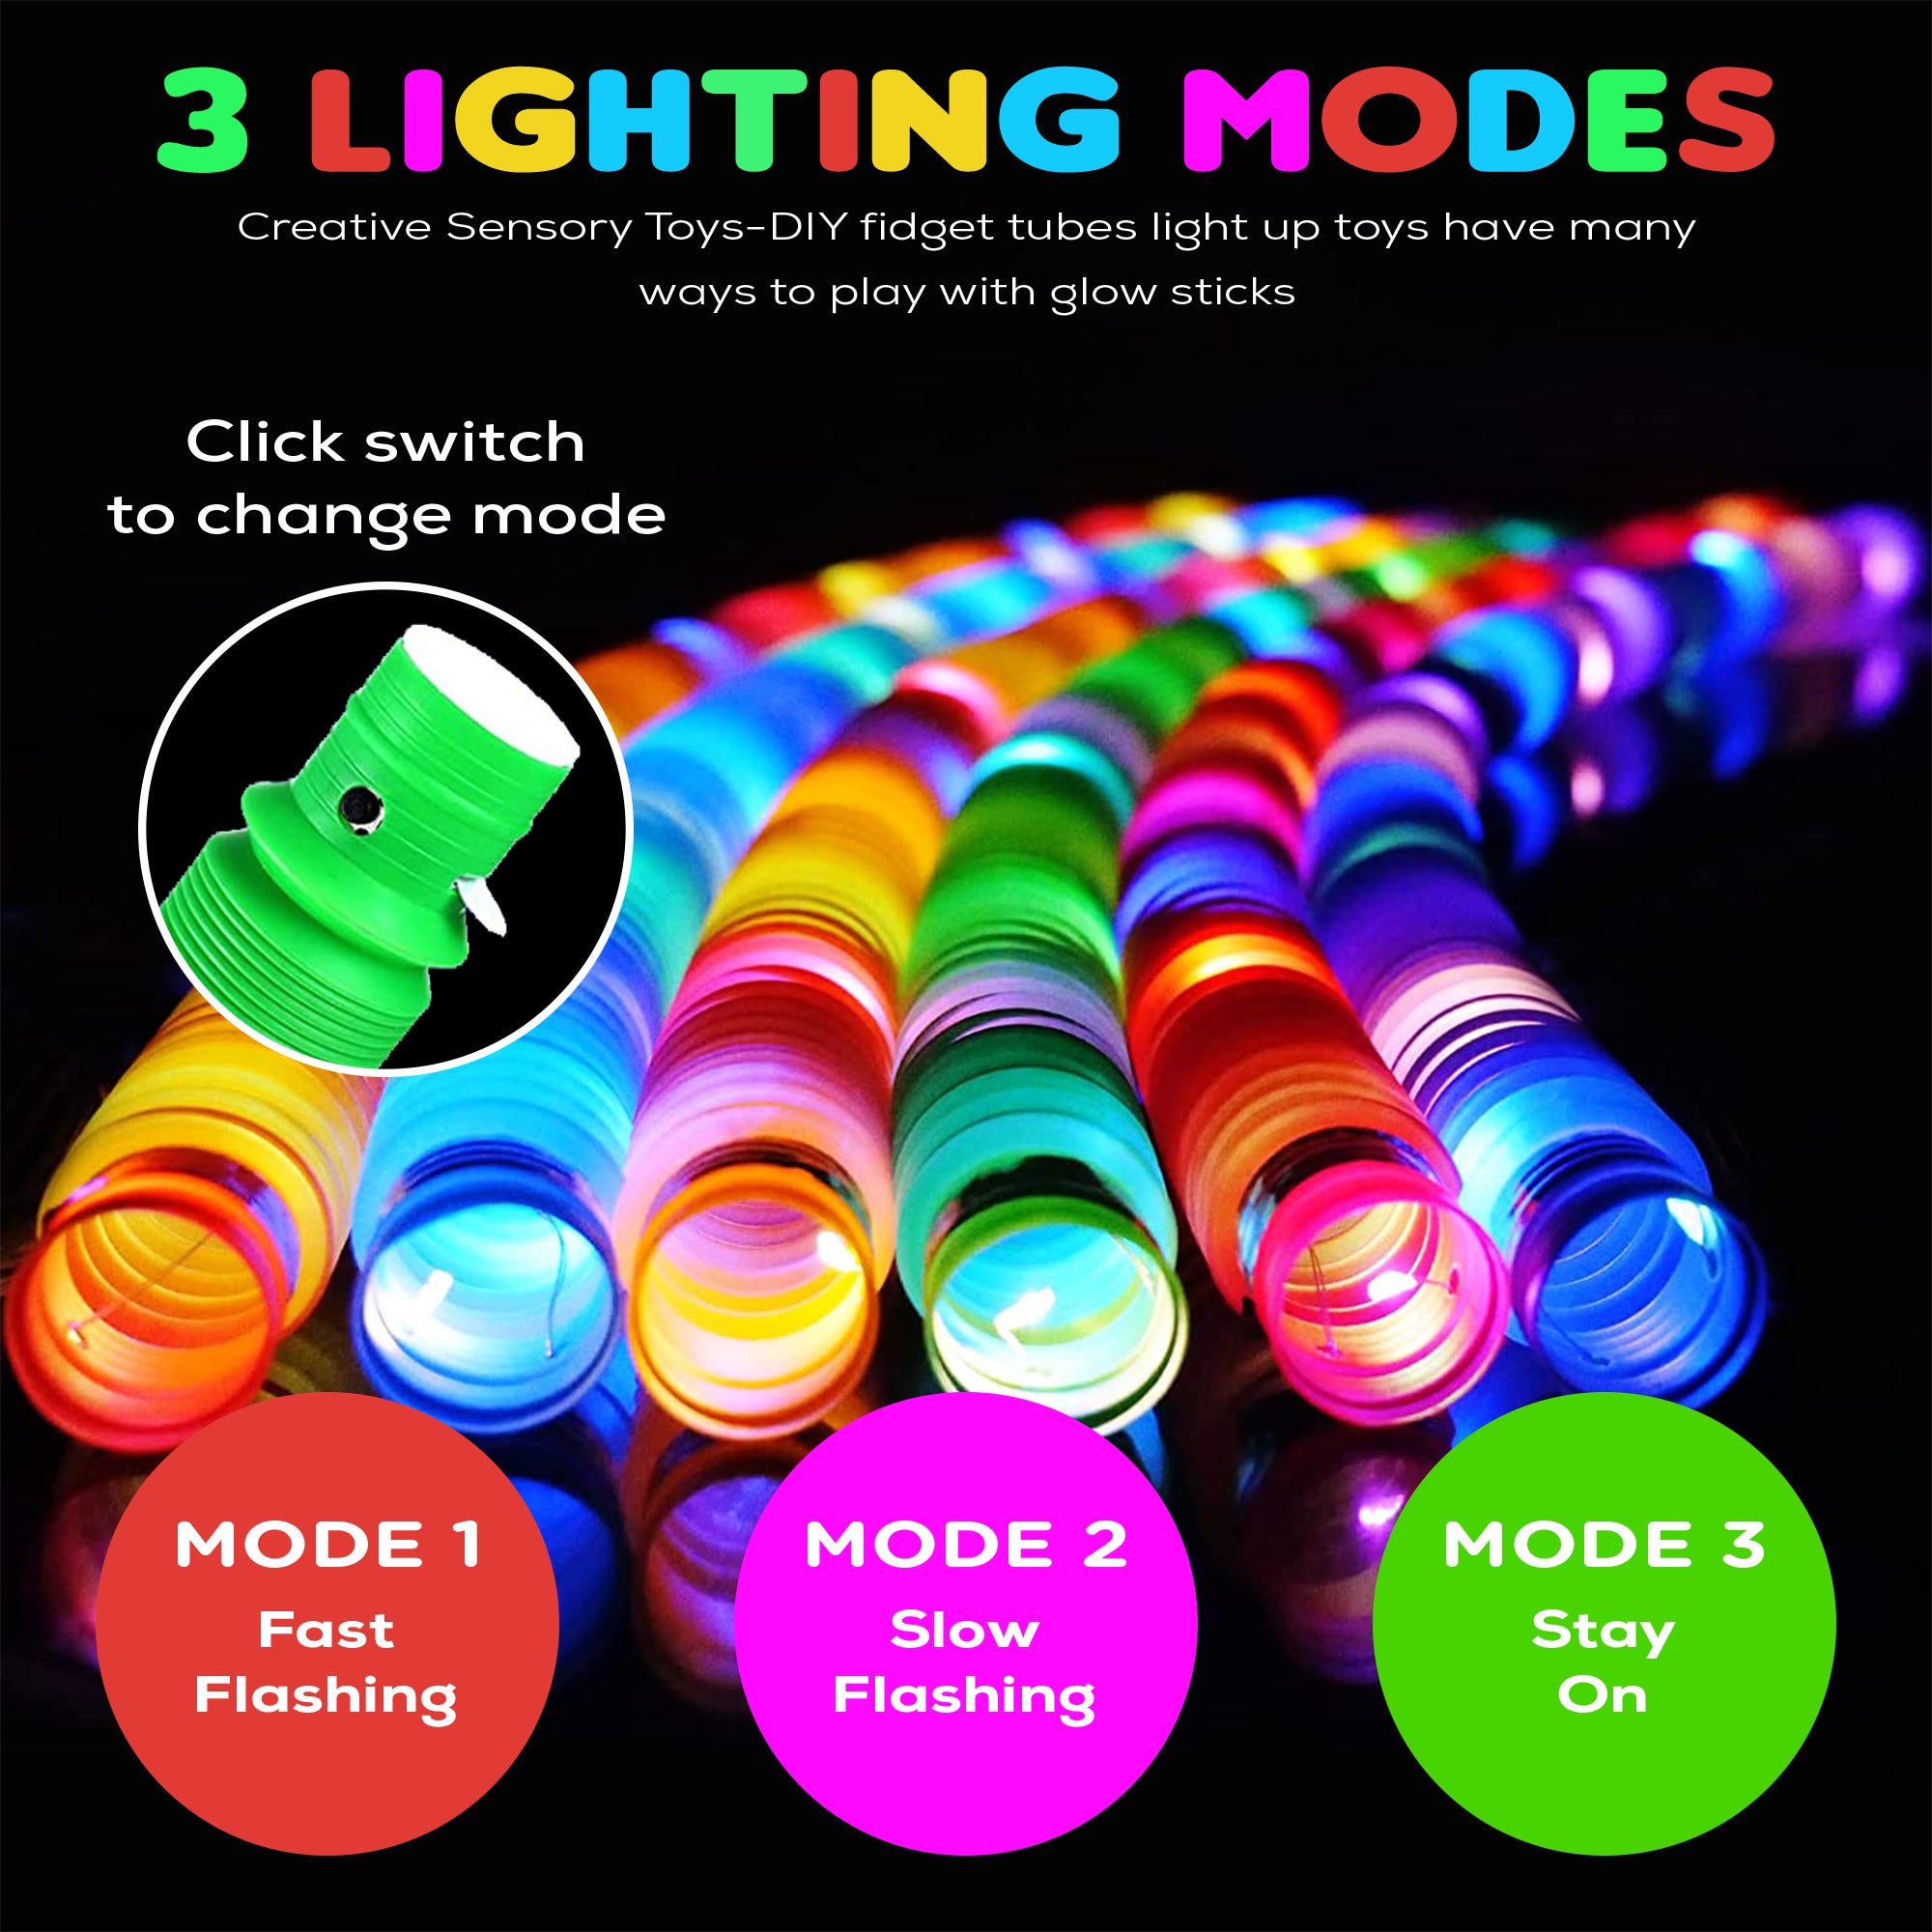 Jumbo LED Glow Tubes Light Up In The Dark Party Favors Pop It Sticks Sensory Fidget Toy Connectors for Bracelets, Pull And Stretch Toys Dance Disco Wedding Birthday Raves Concert Camping